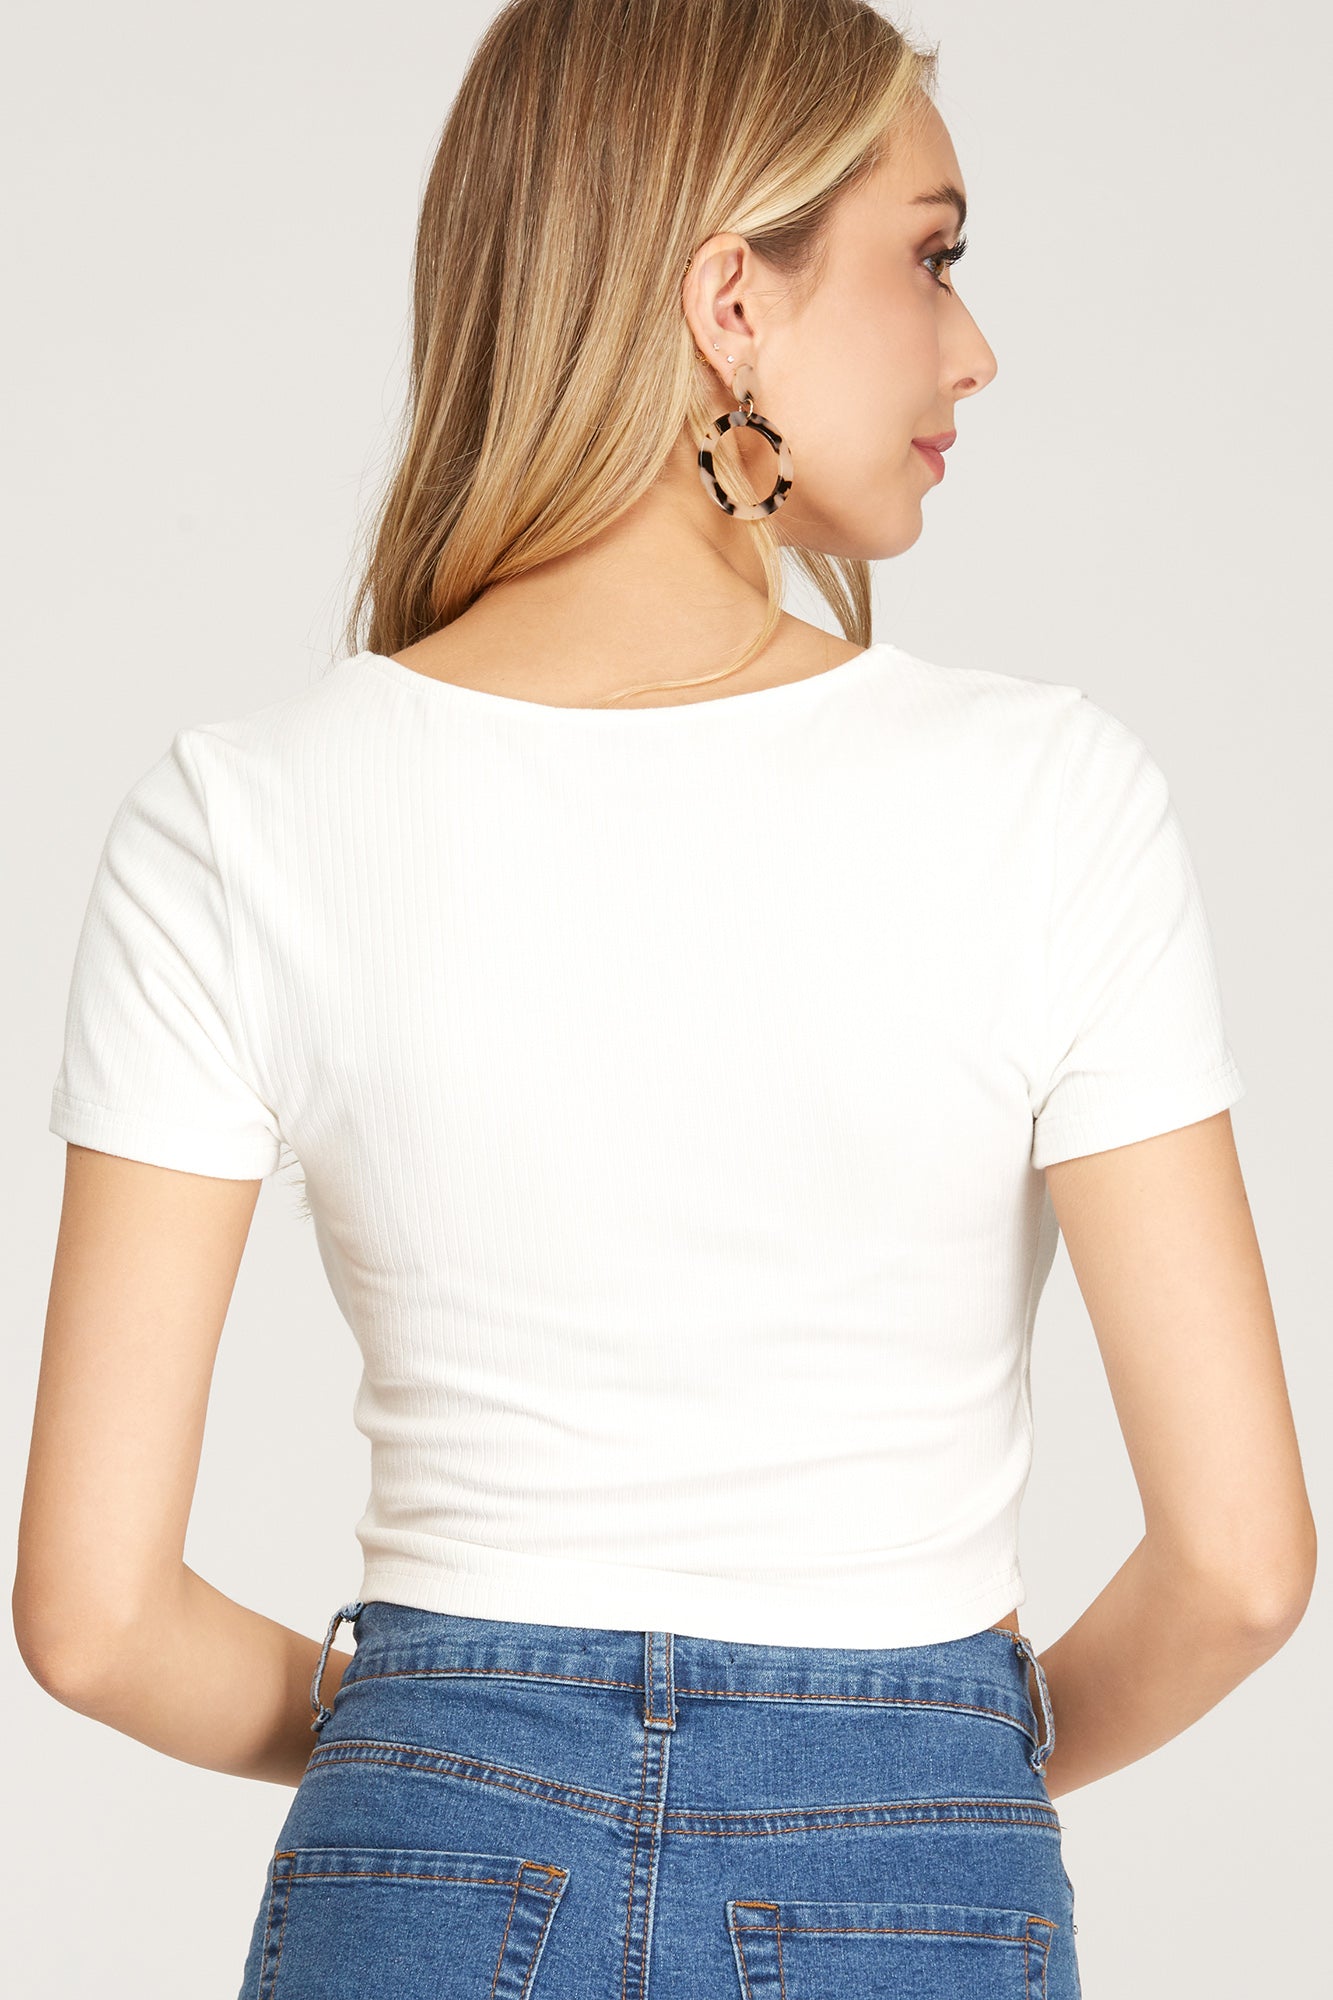 SS9127 She & Sky Short Sleeve Square Neck Stretch Rib Knit Top Tops